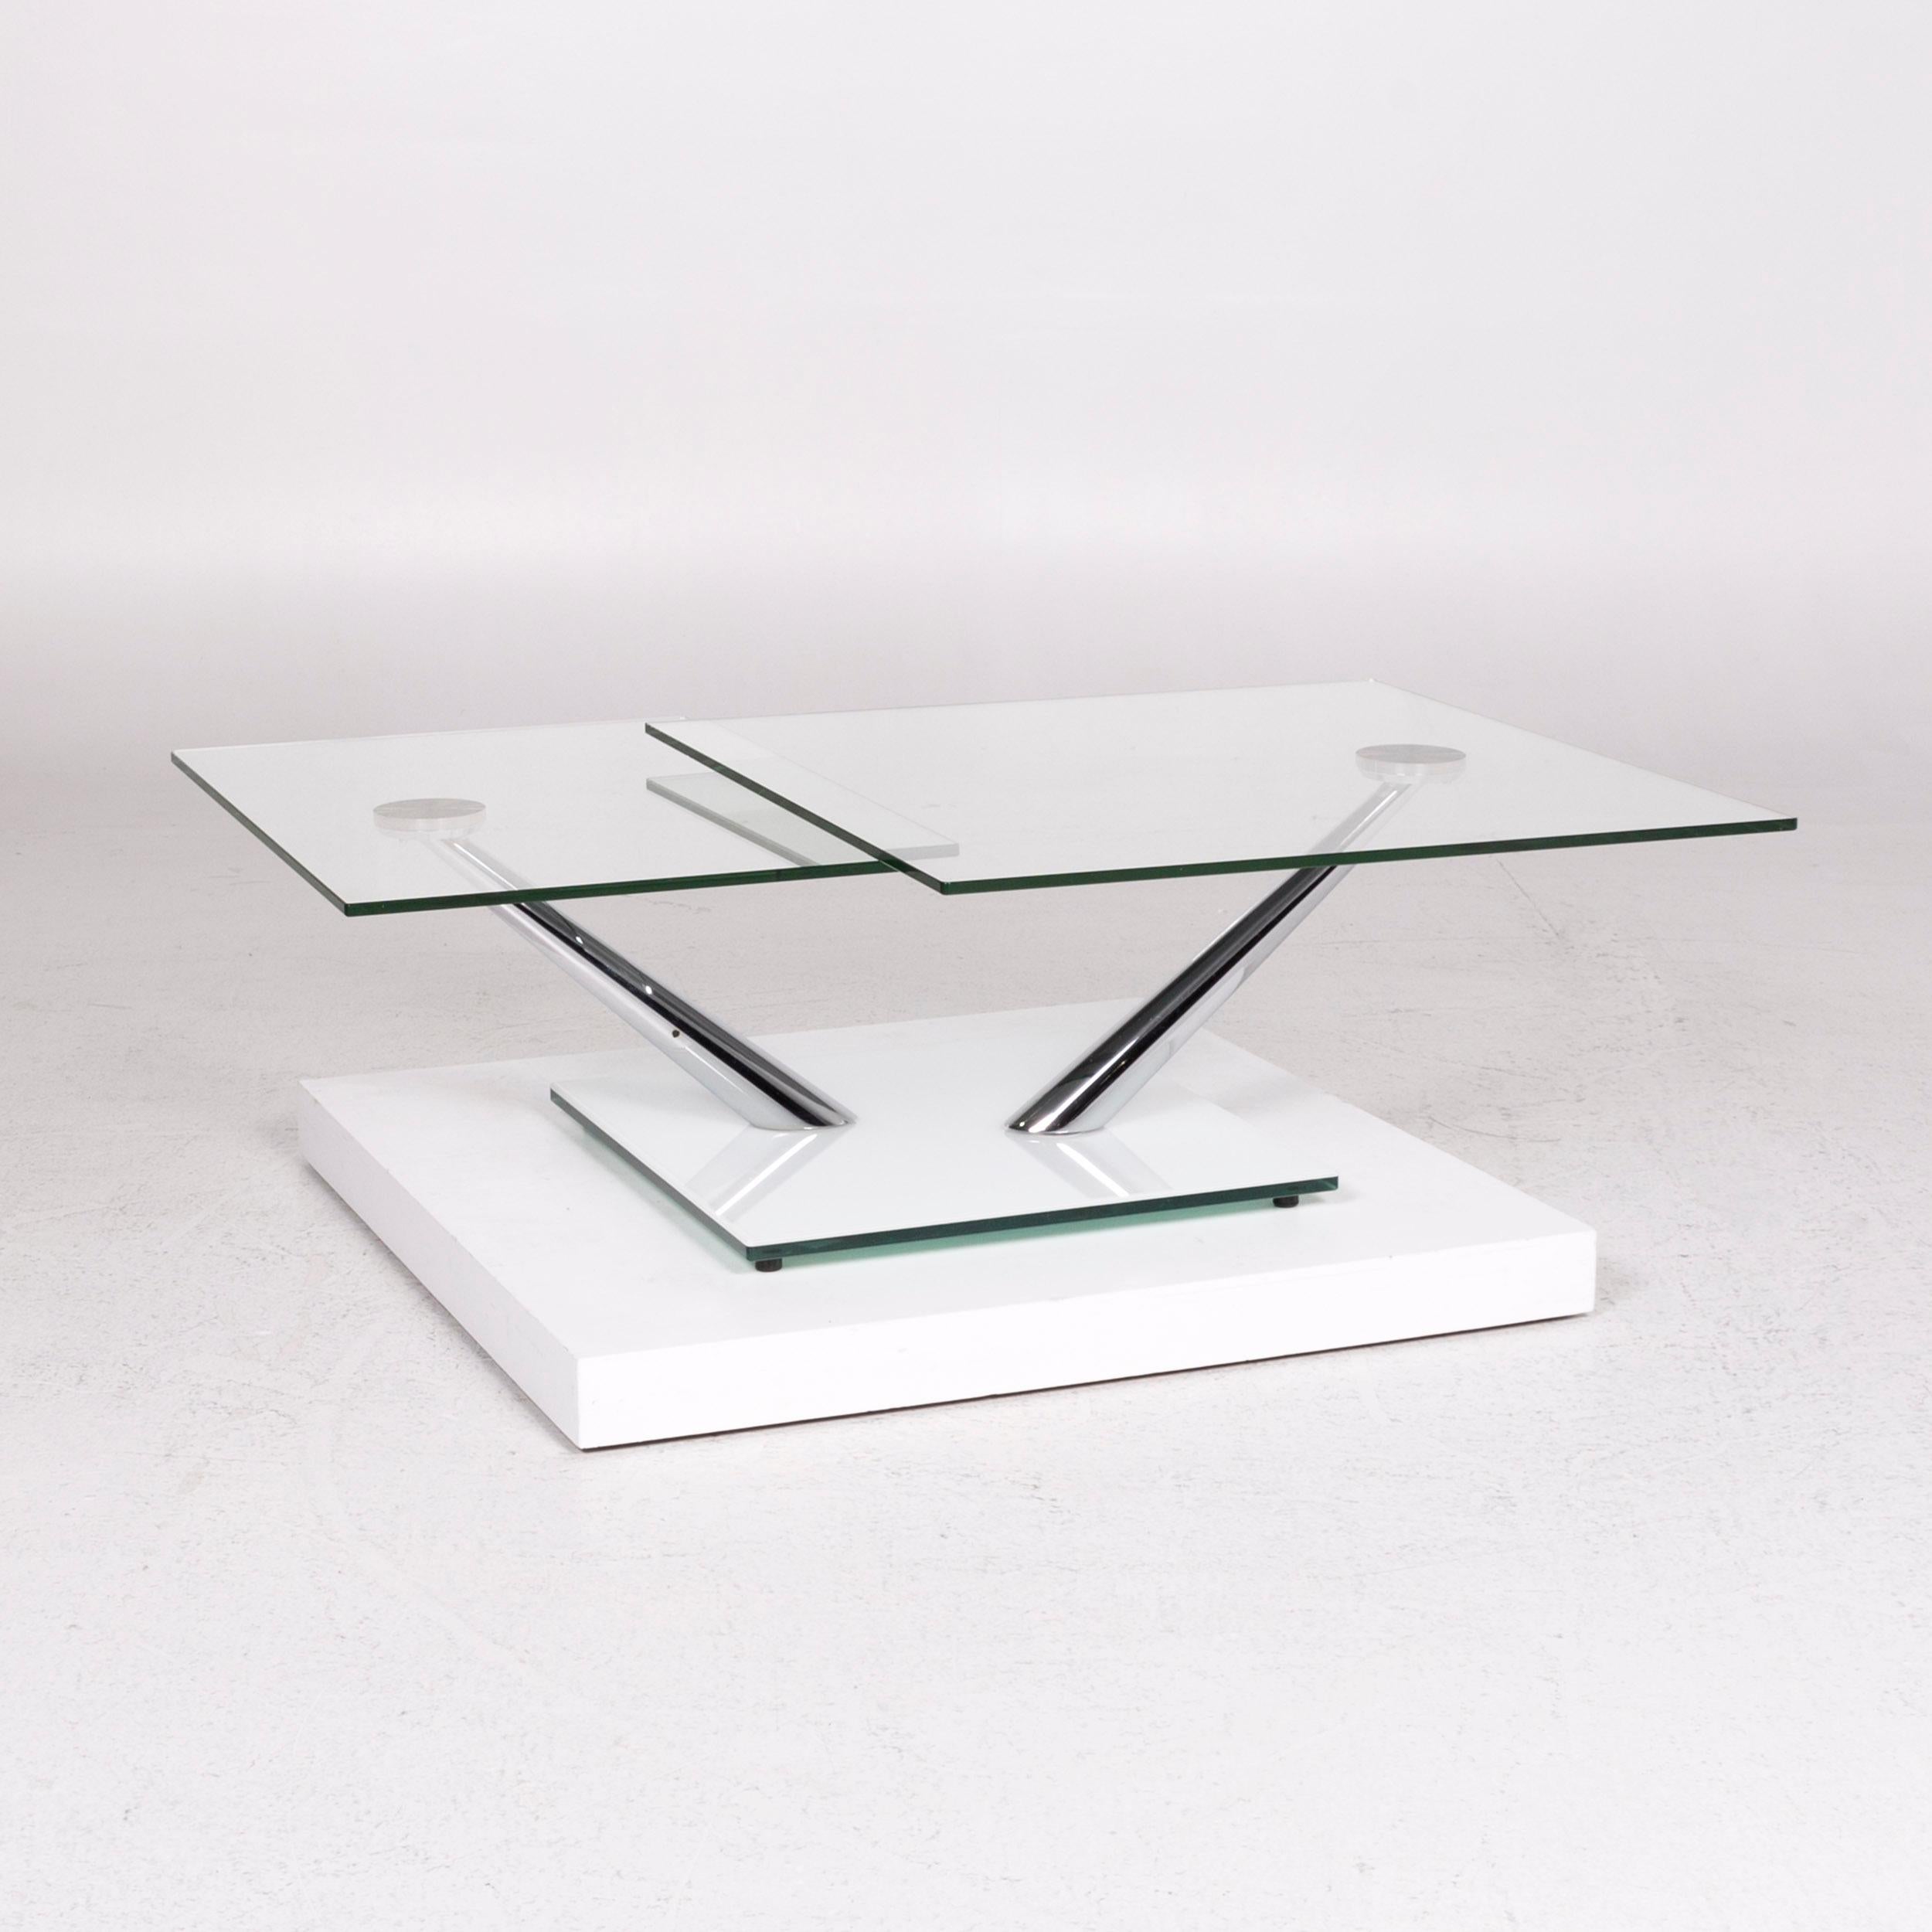 We bring to you a NAOS glass table silver adjustable function table.
 SKU: #12192
 

 Product Measurements in centimeters:
 

 depth: 87
 width: 87
 height: 40
 seat-height: 
 rest-height: 
 seat-depth: 
 seat-width: 
 back-height: